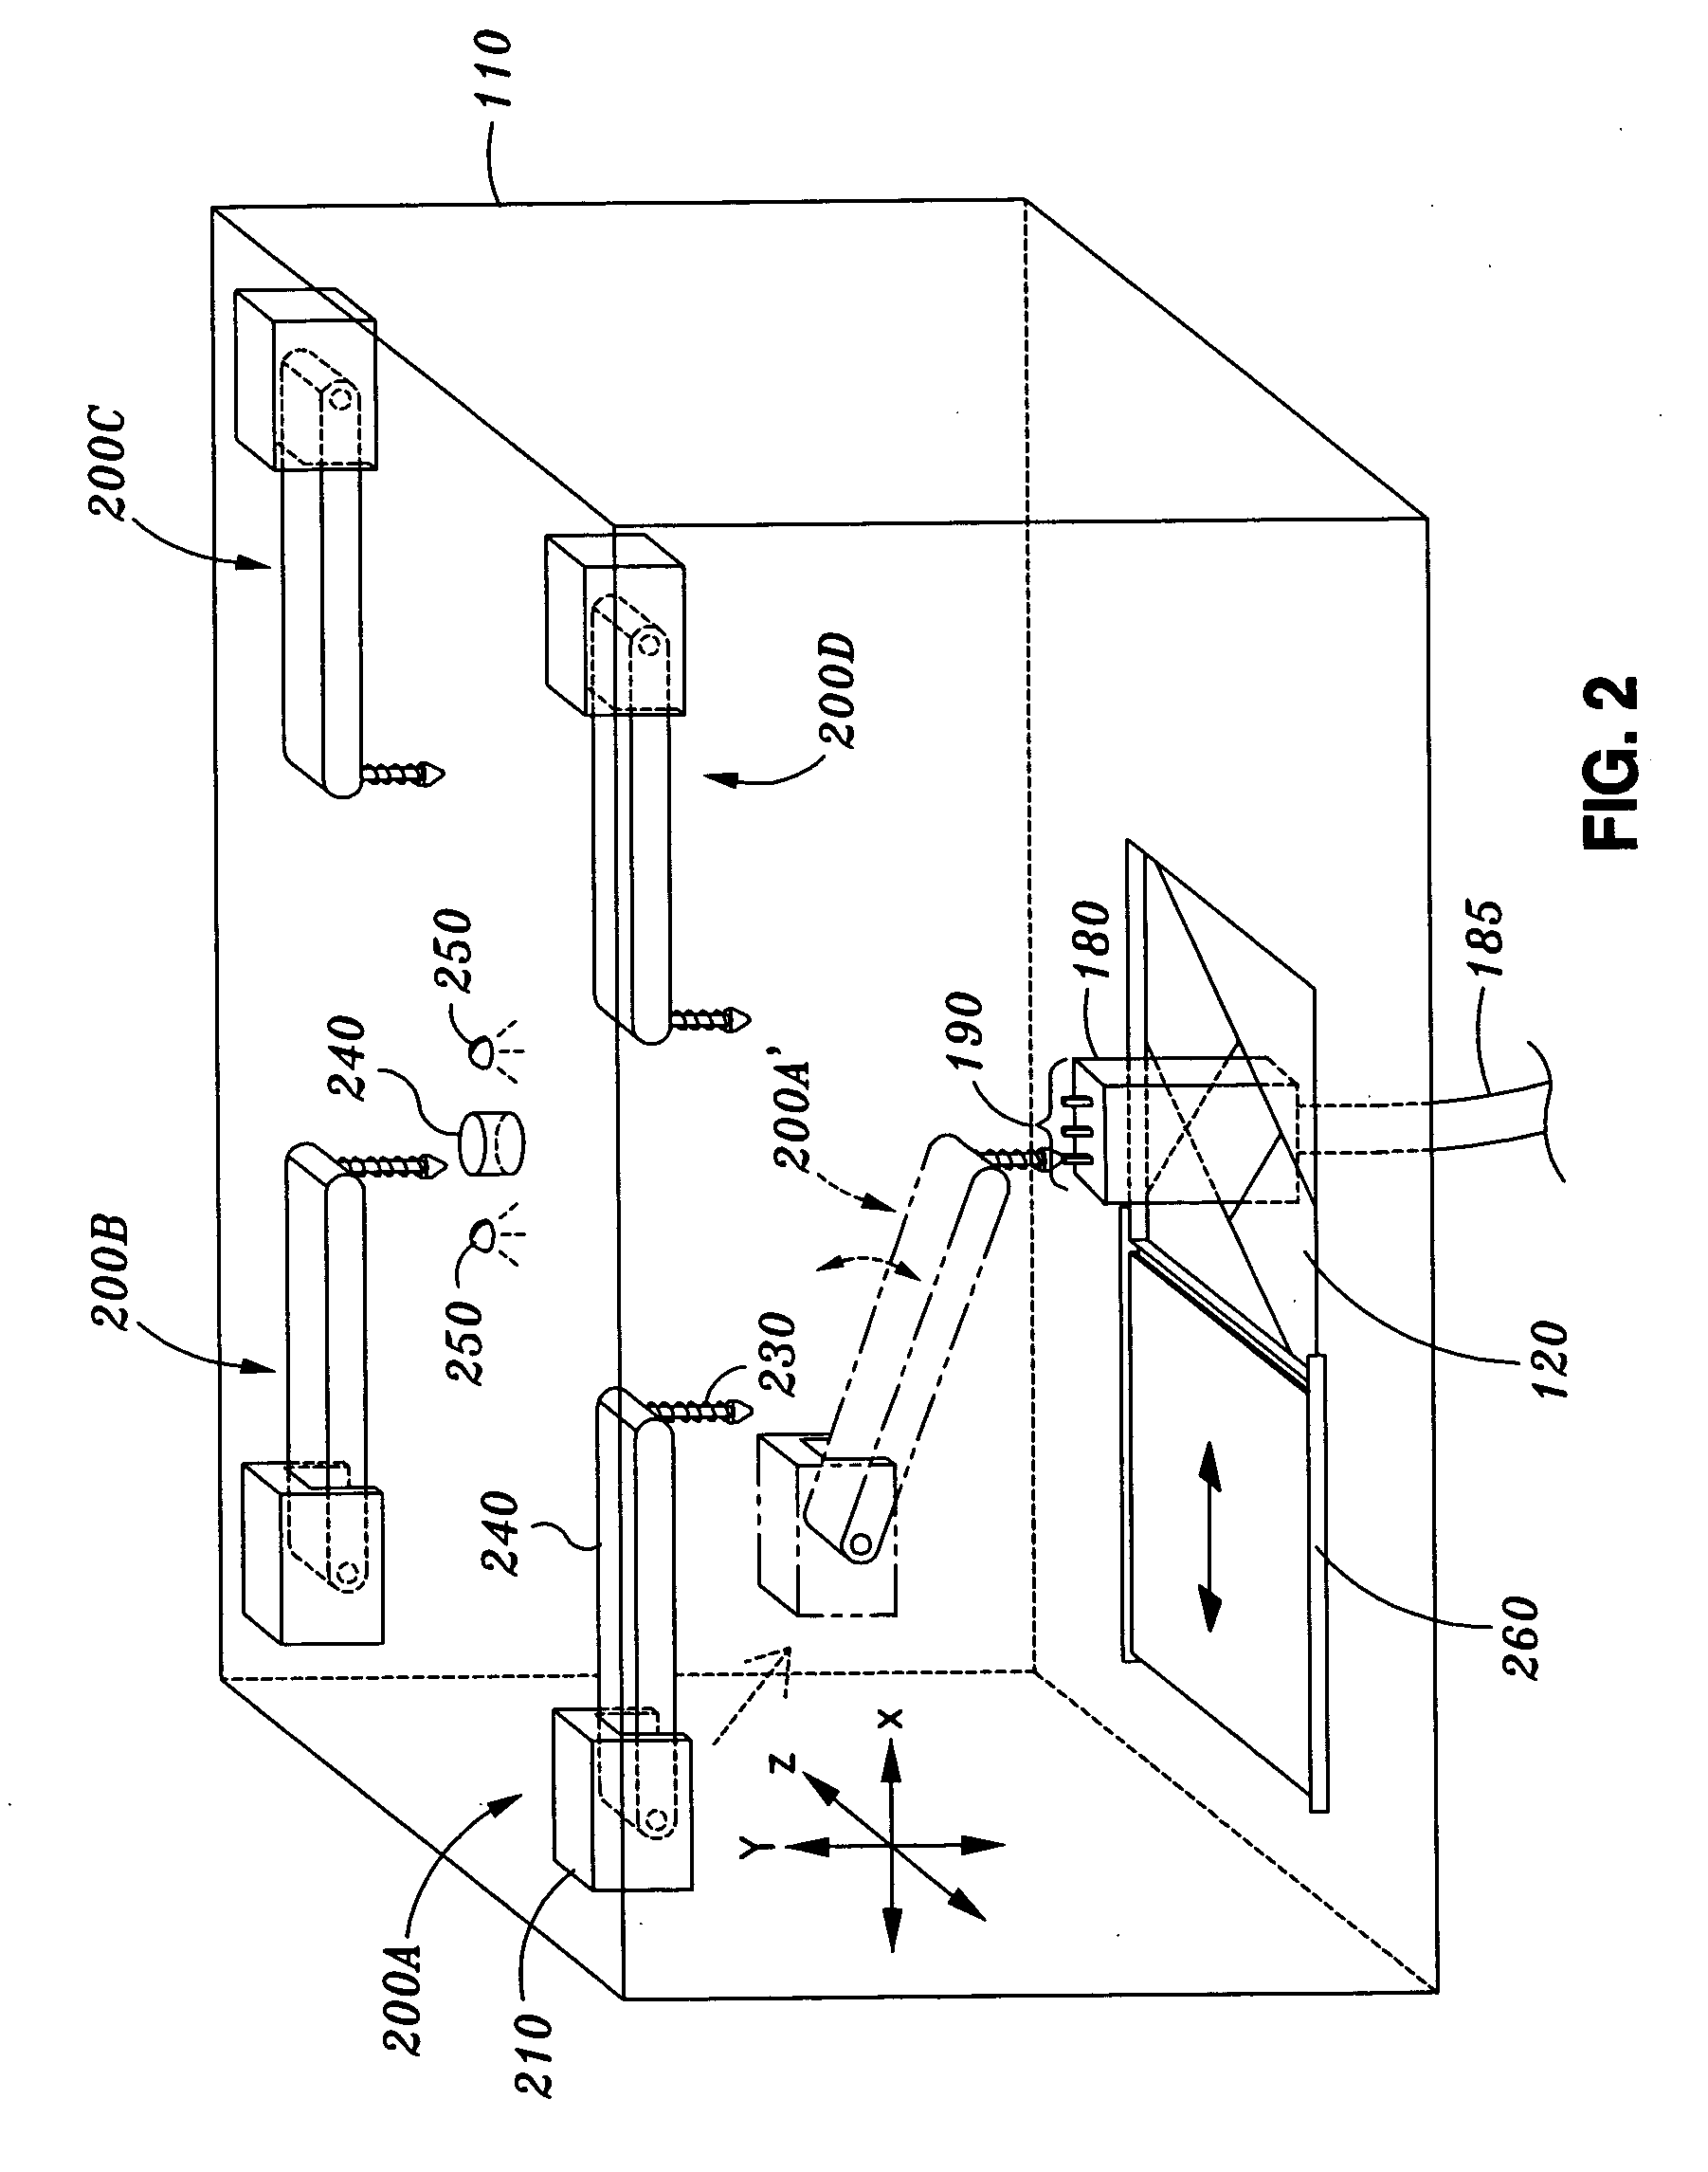 Connector probing system